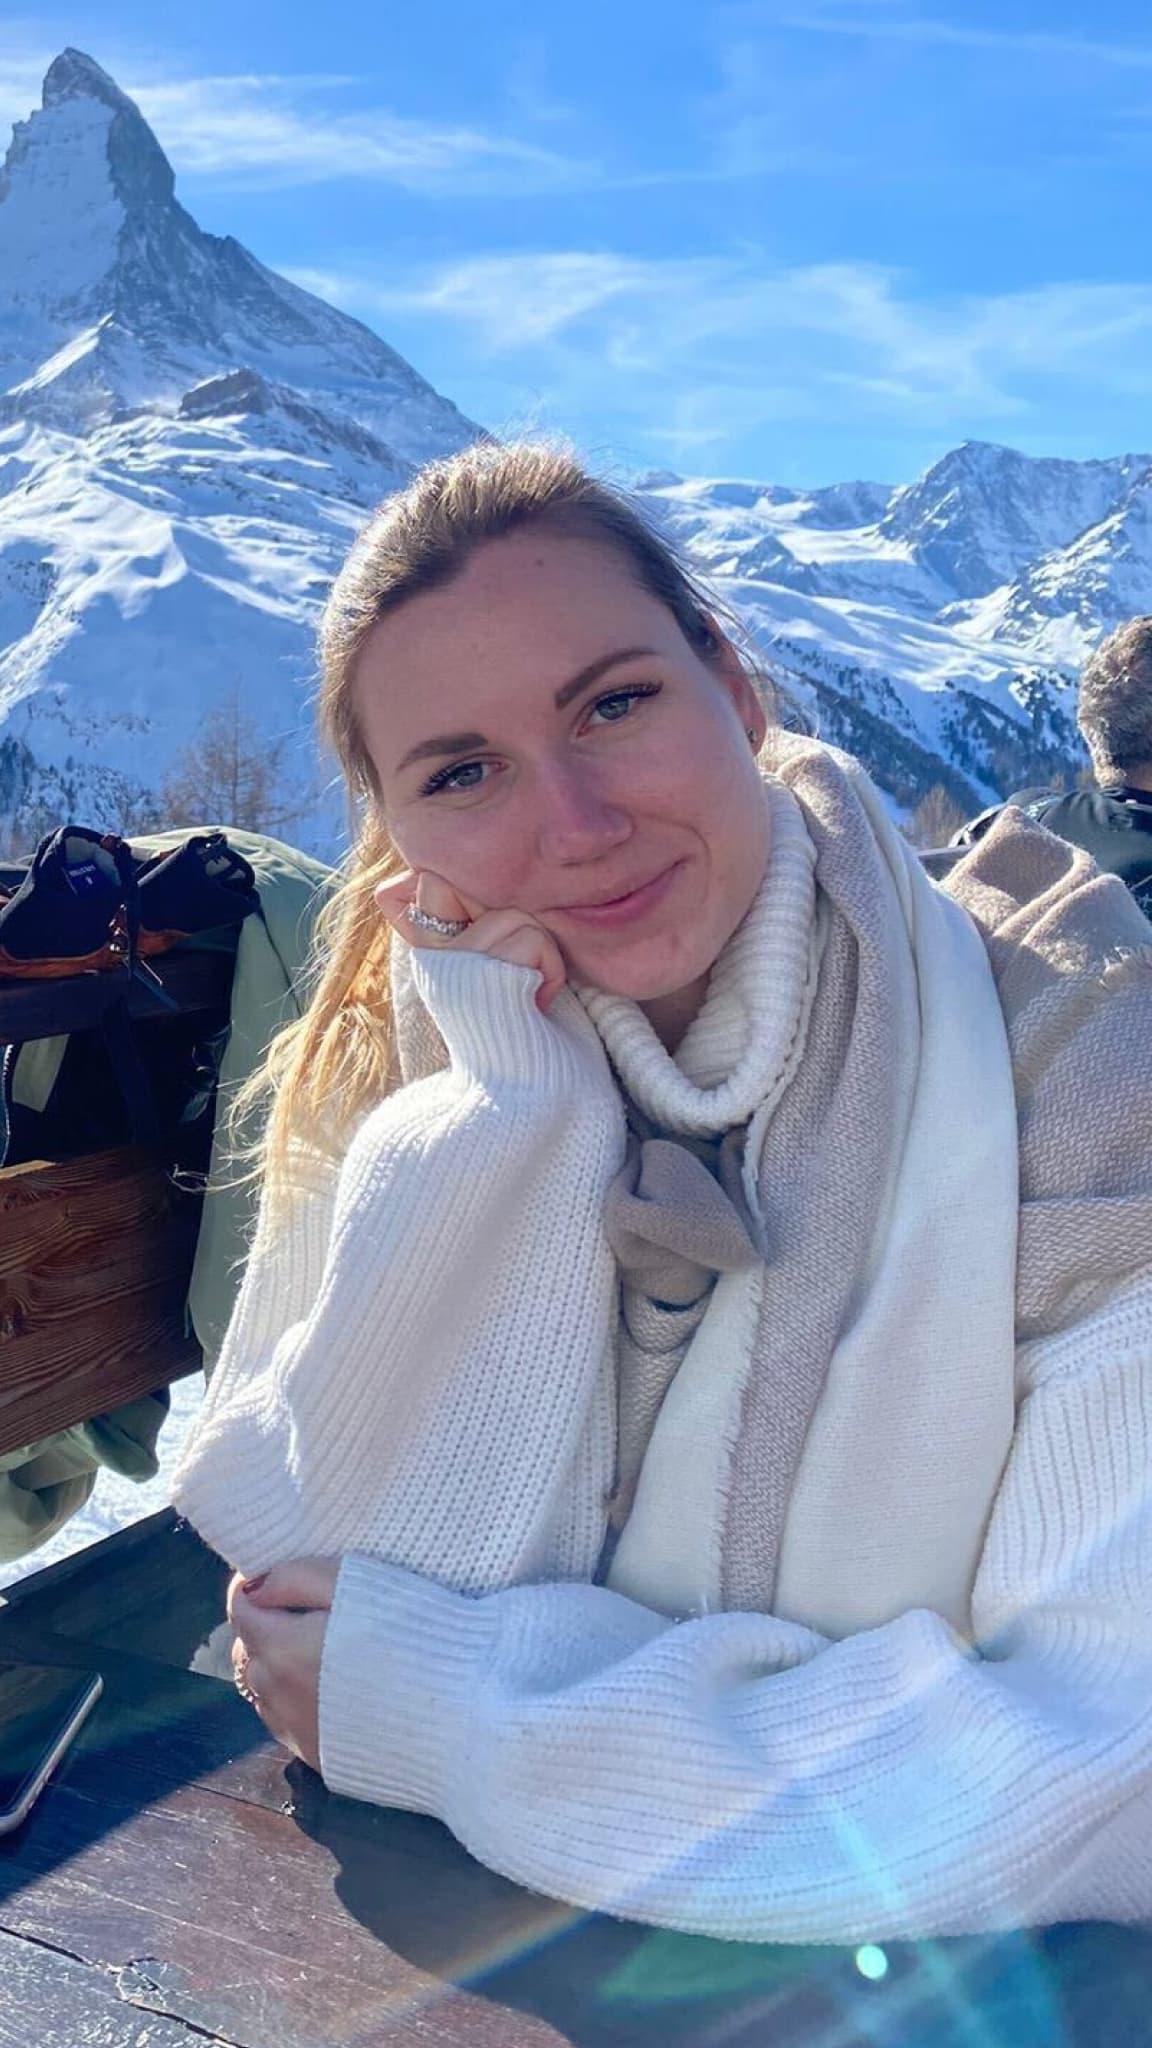 A woman is sitting outside and resting her cheek on her closed hand with a snowy mountain peak in the background